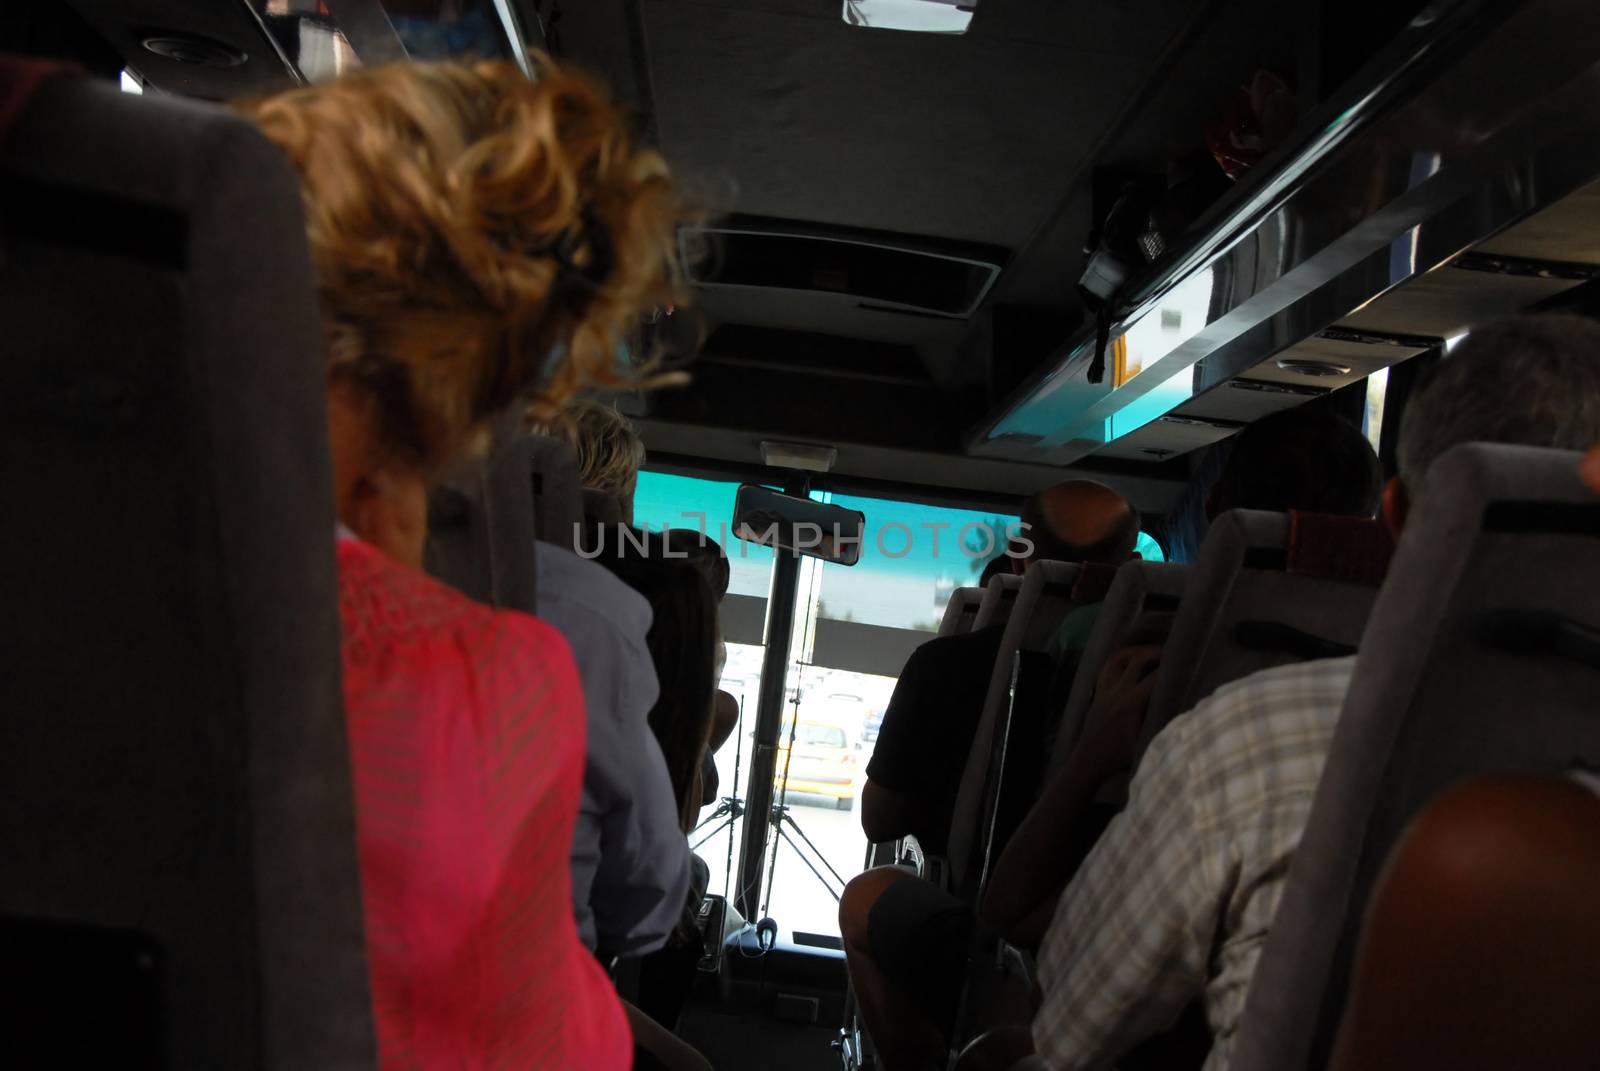 tourists travelling by bus from passage between seats rows